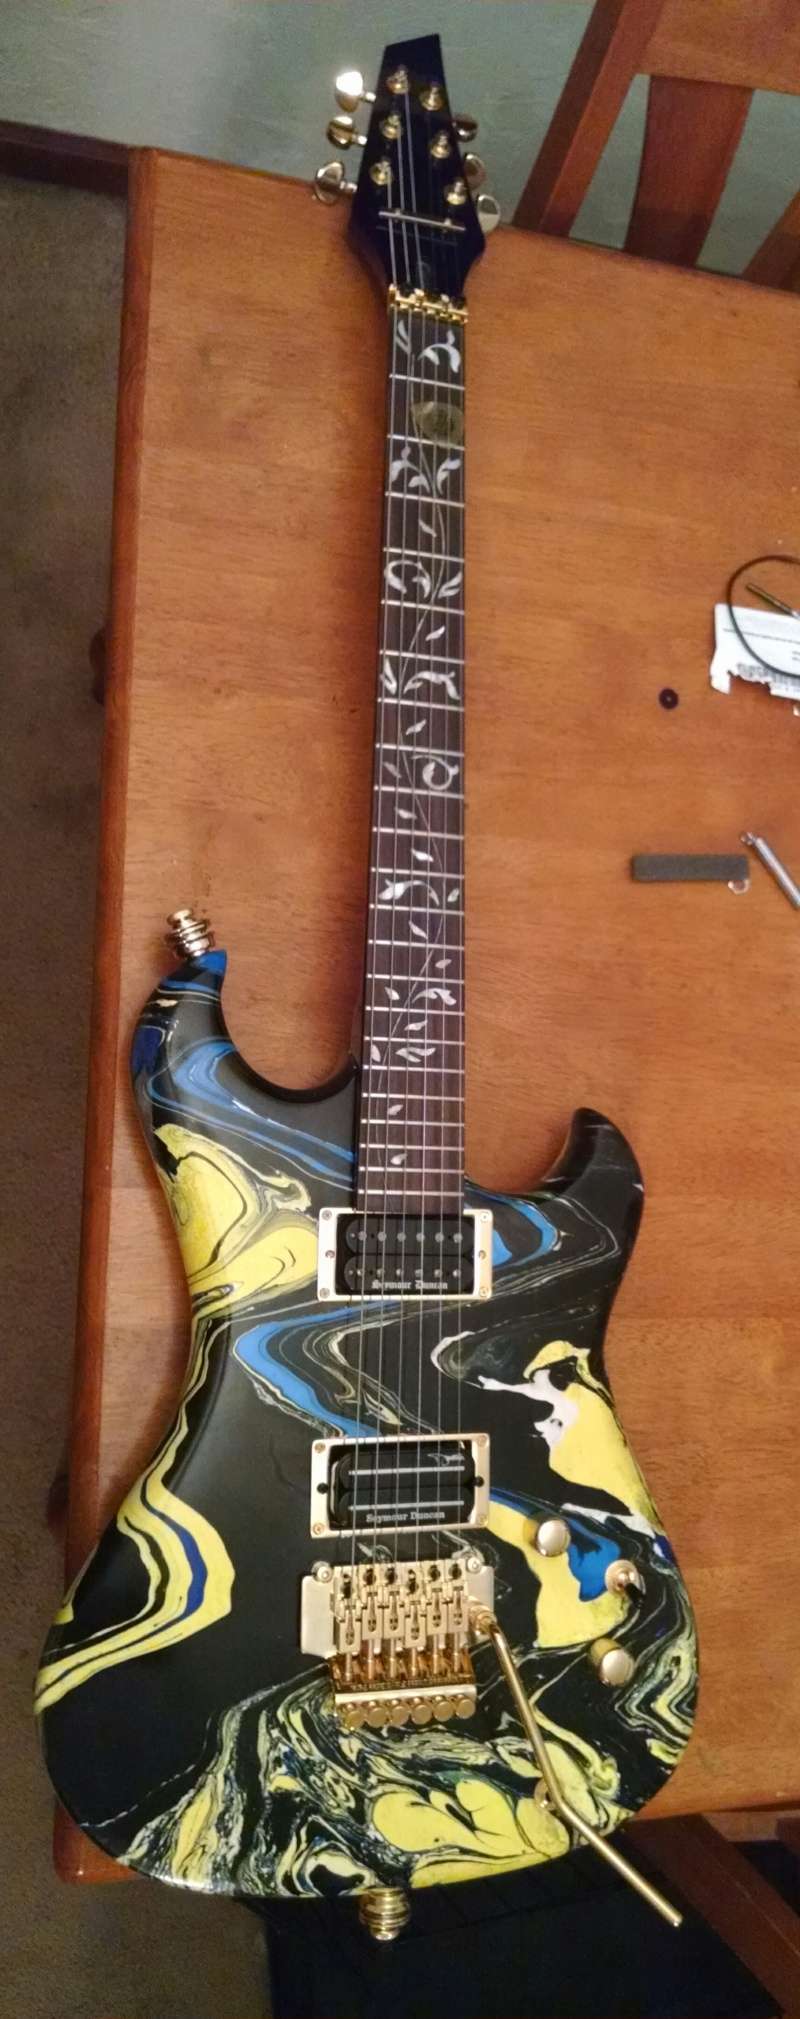 replacement - New Bridge & Neck on Westone Spectrum DX - Advice Needed on Neck and Bridge Replacement - Page 2 Img_2019